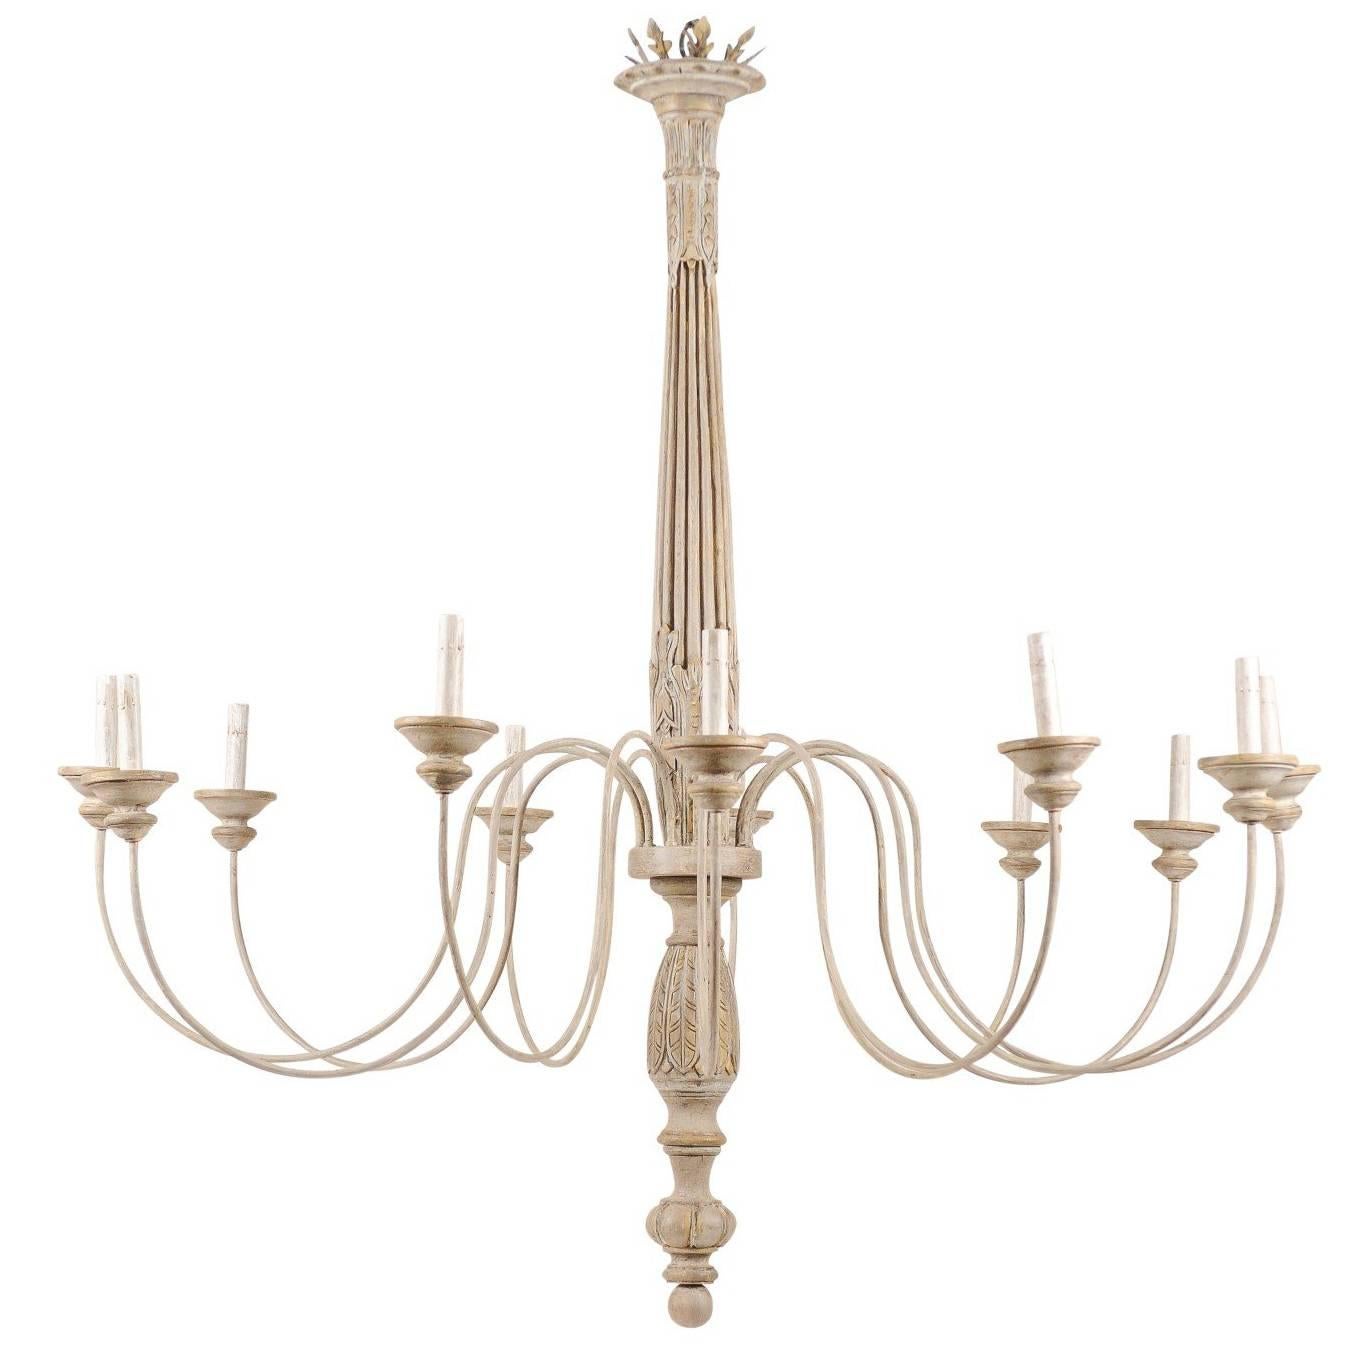 Elegant Carved and Painted Twelve-Light Neutral Chandelier of Italian Fragments